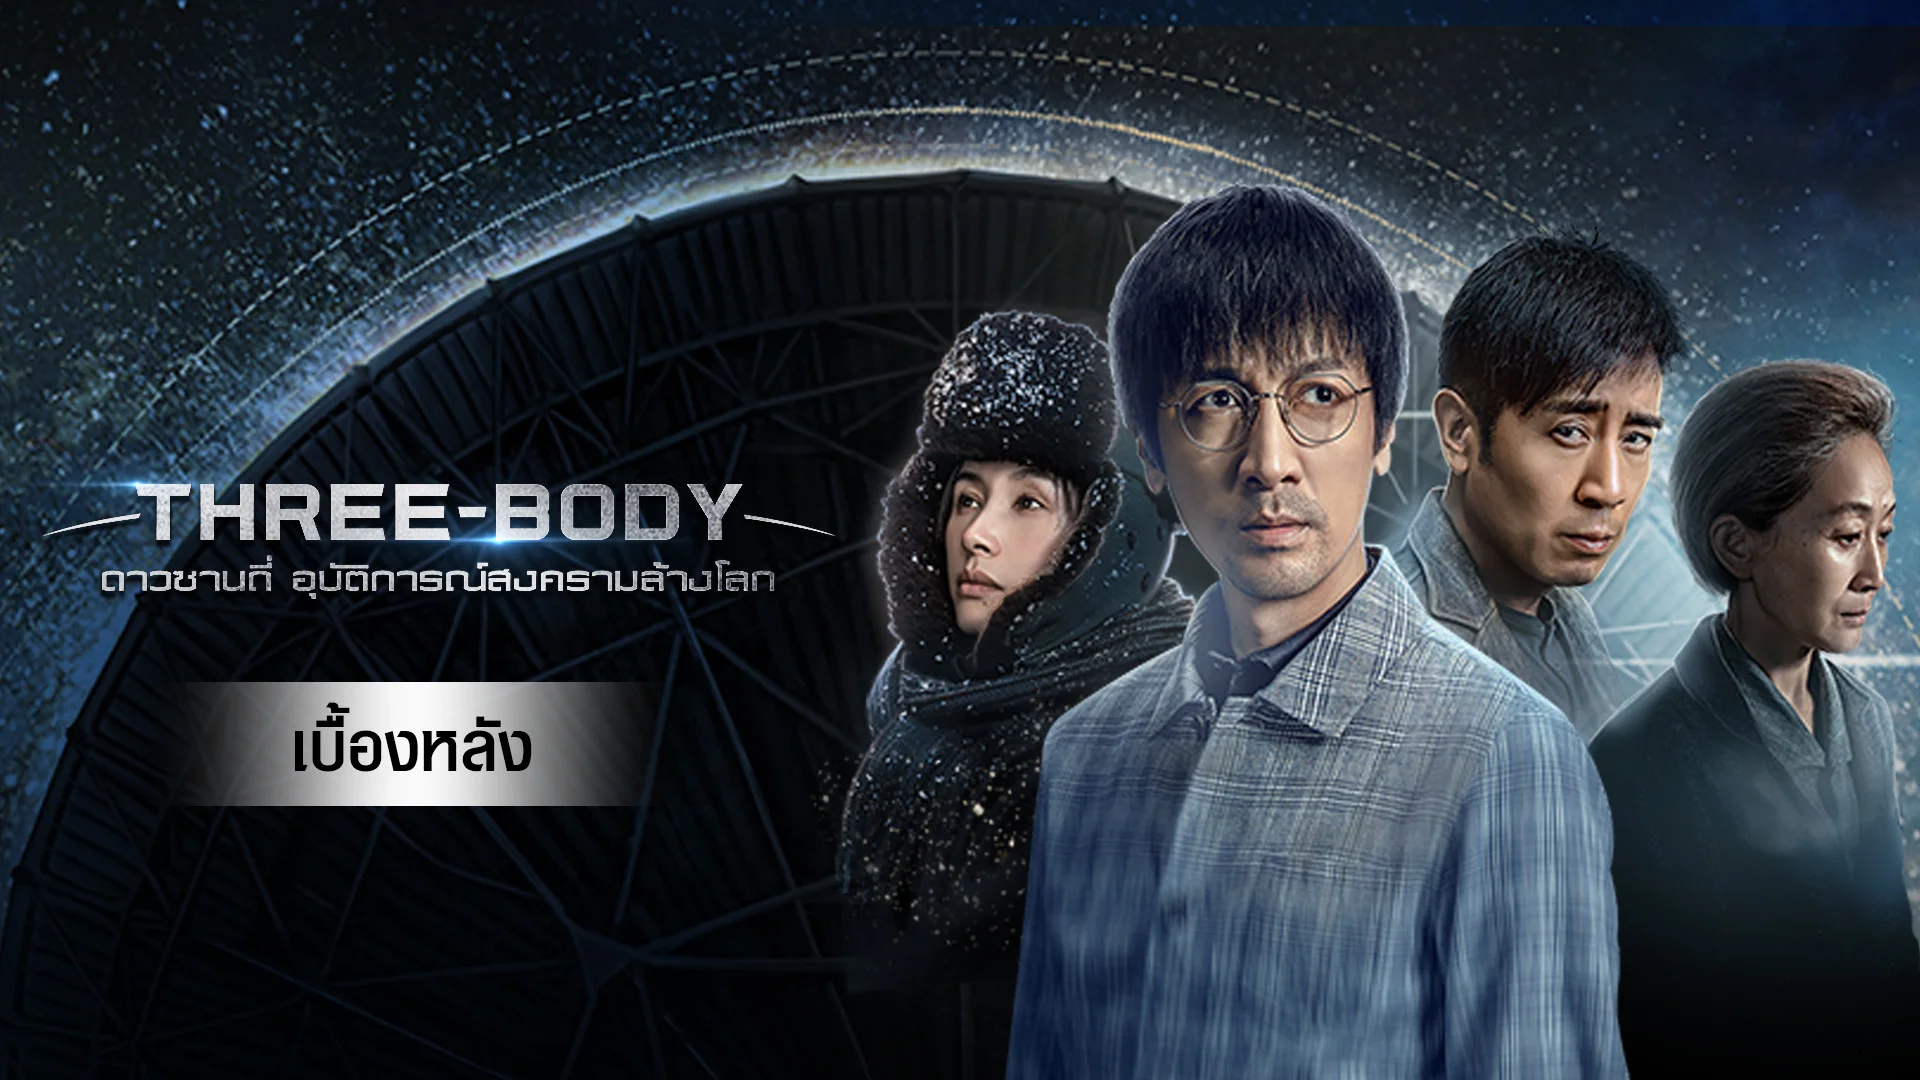 The Three-Body Problem: Epic Chinese Sci-Fi Premieres This Month